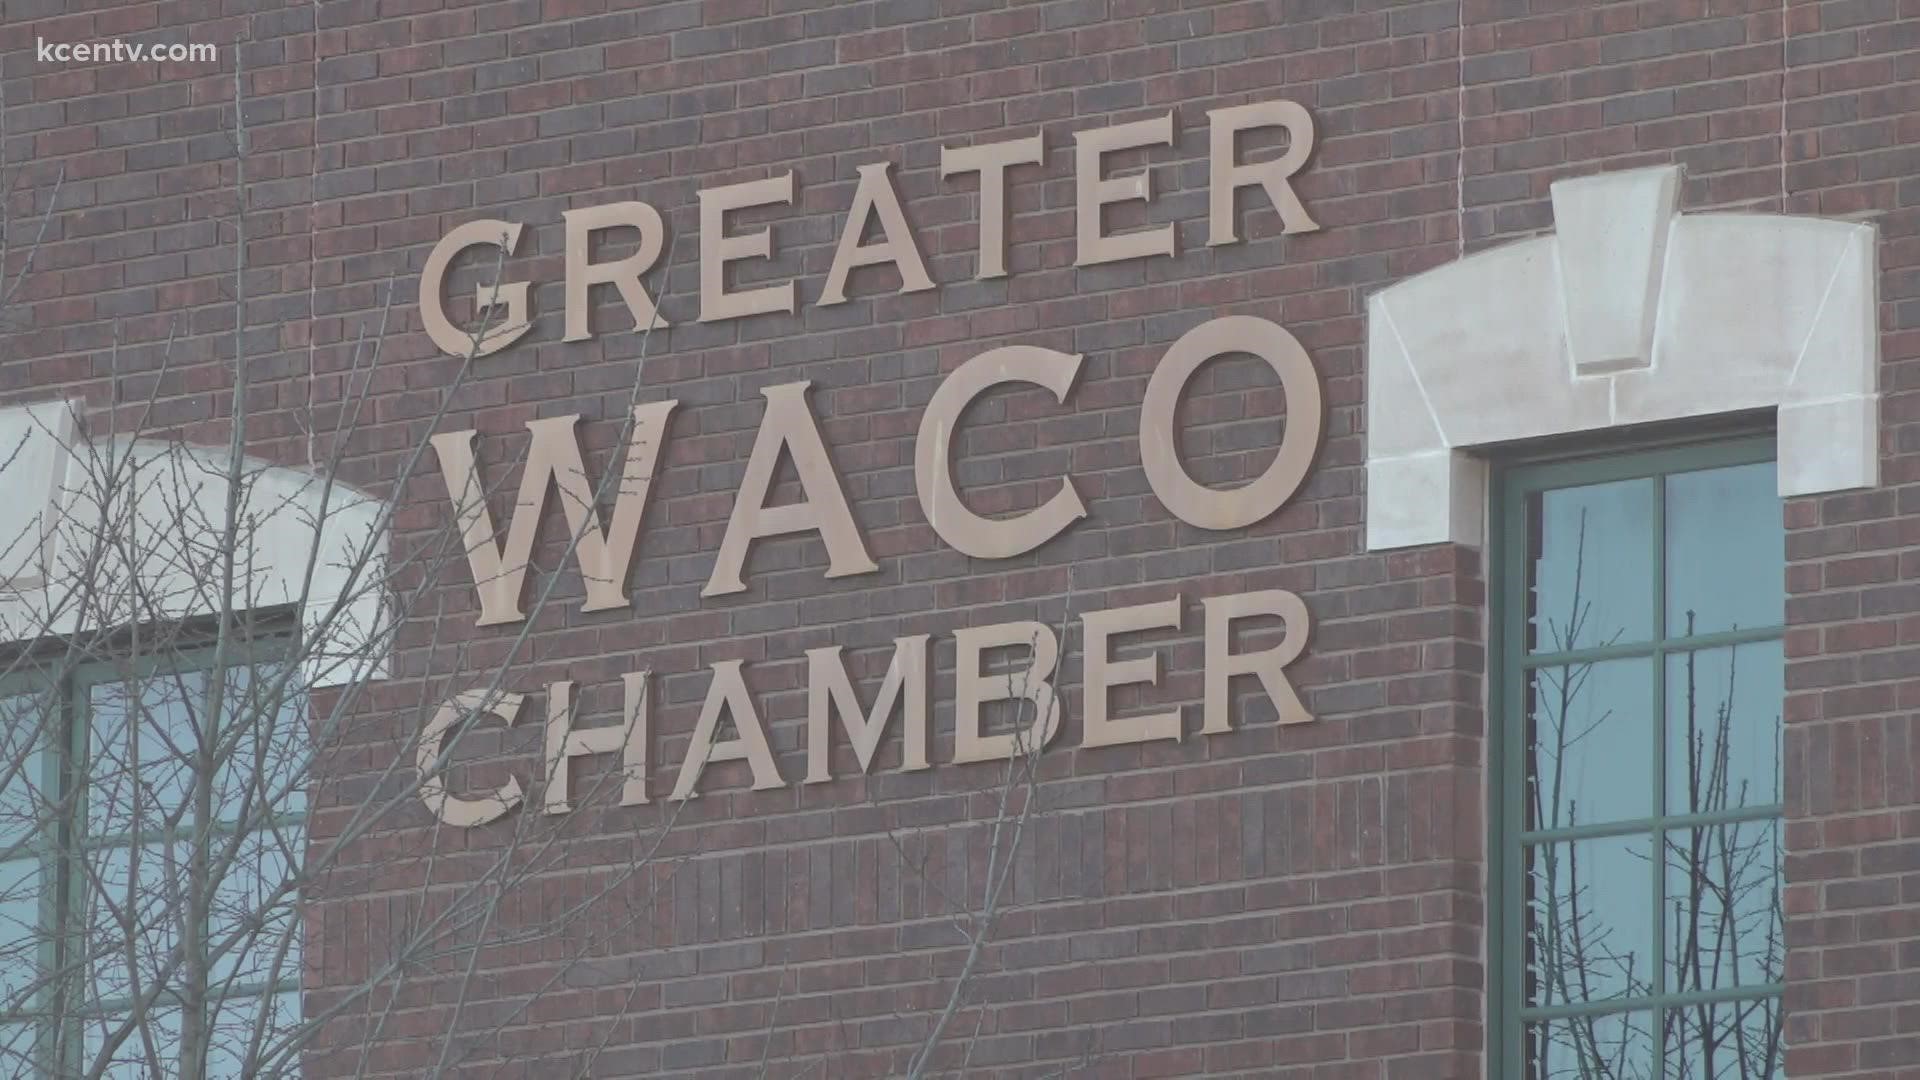 A new talent recruitment initiative called "inWACO" was launched on Friday by the Greater Waco Chamber of Commerce in hopes to attract and retain workers in the city